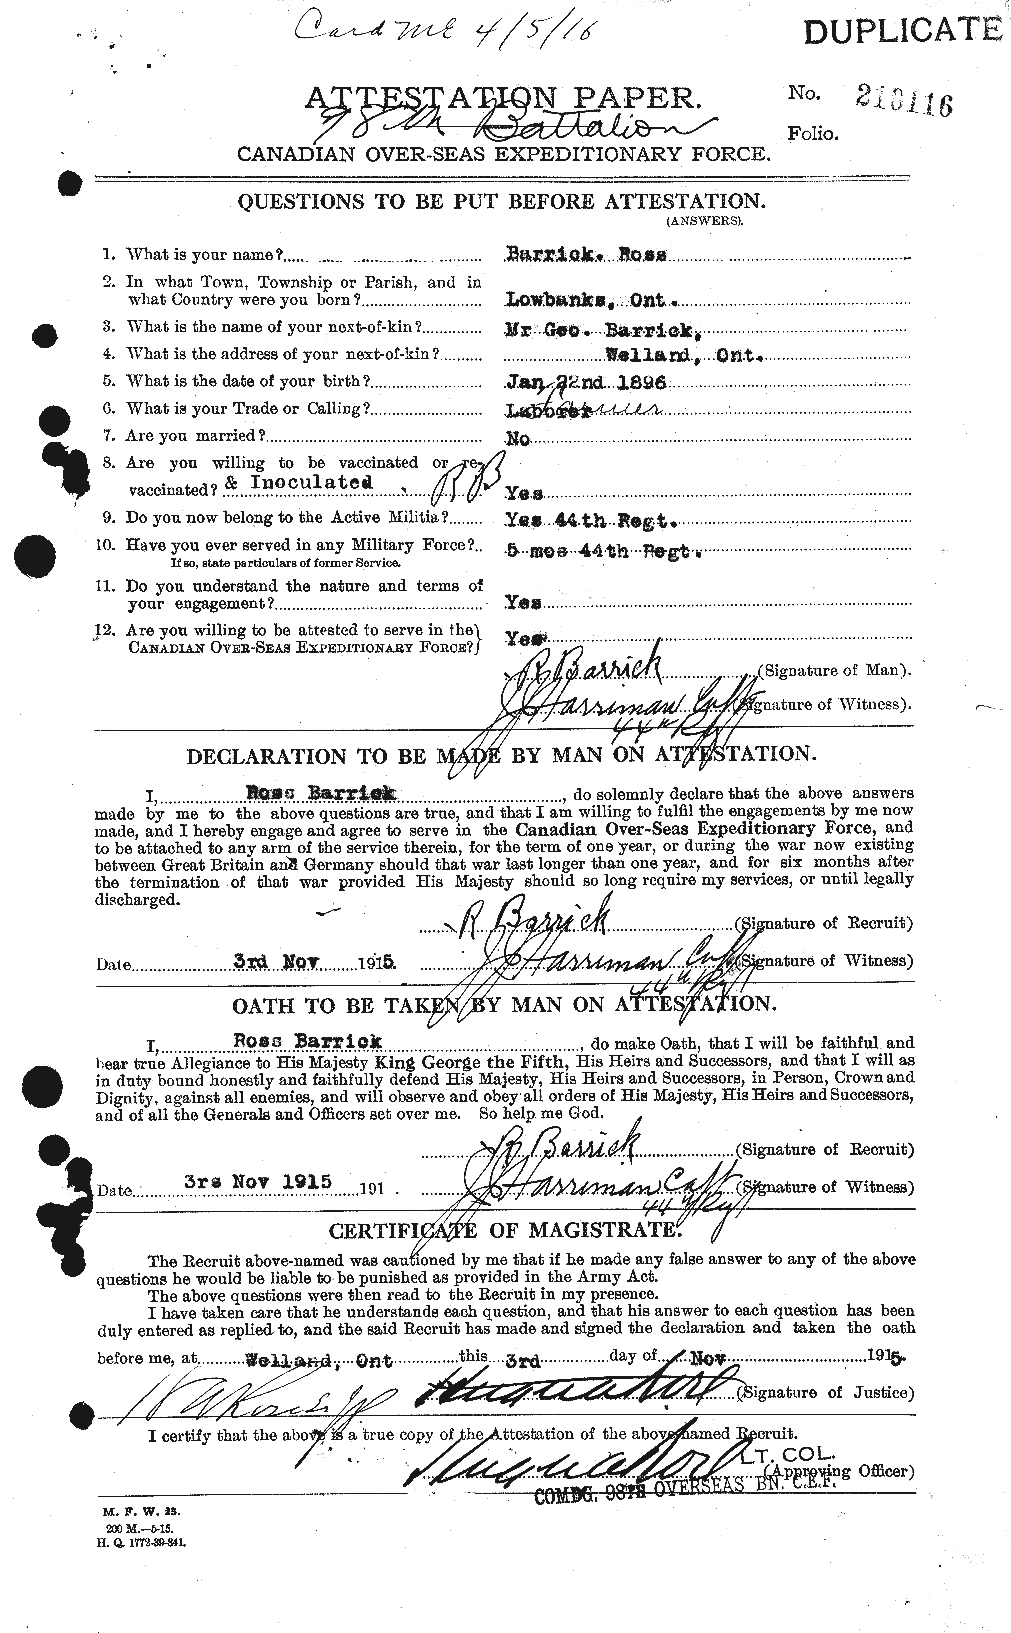 Personnel Records of the First World War - CEF 220059a